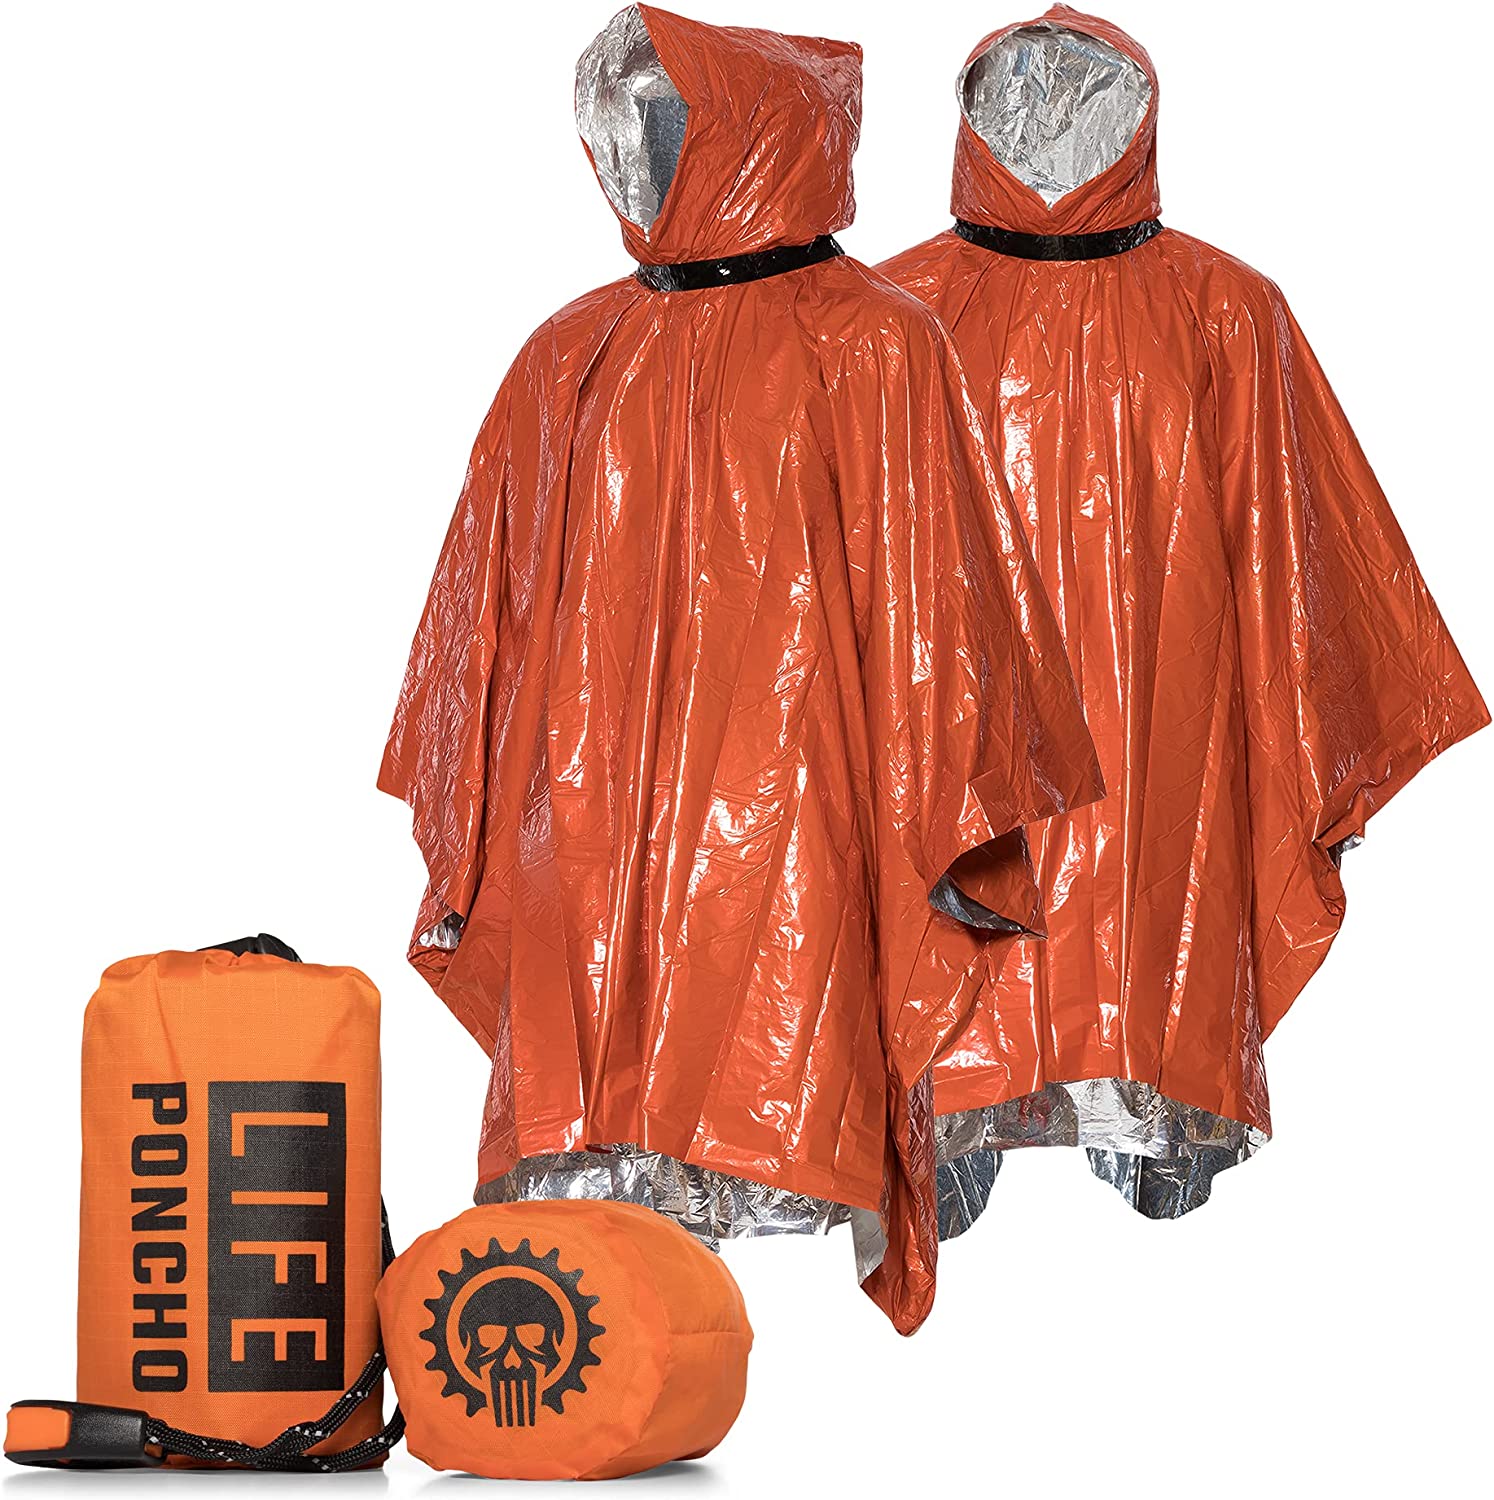 Go Time Gear Emergency Survival Life Poncho – 2 Thermal Mylar Space Blanket Rain Ponchos – Use in Camping, Hiking, Survival Gear & Bug Out Bag – Includes Survival Whistle & Paracord String (Orange)